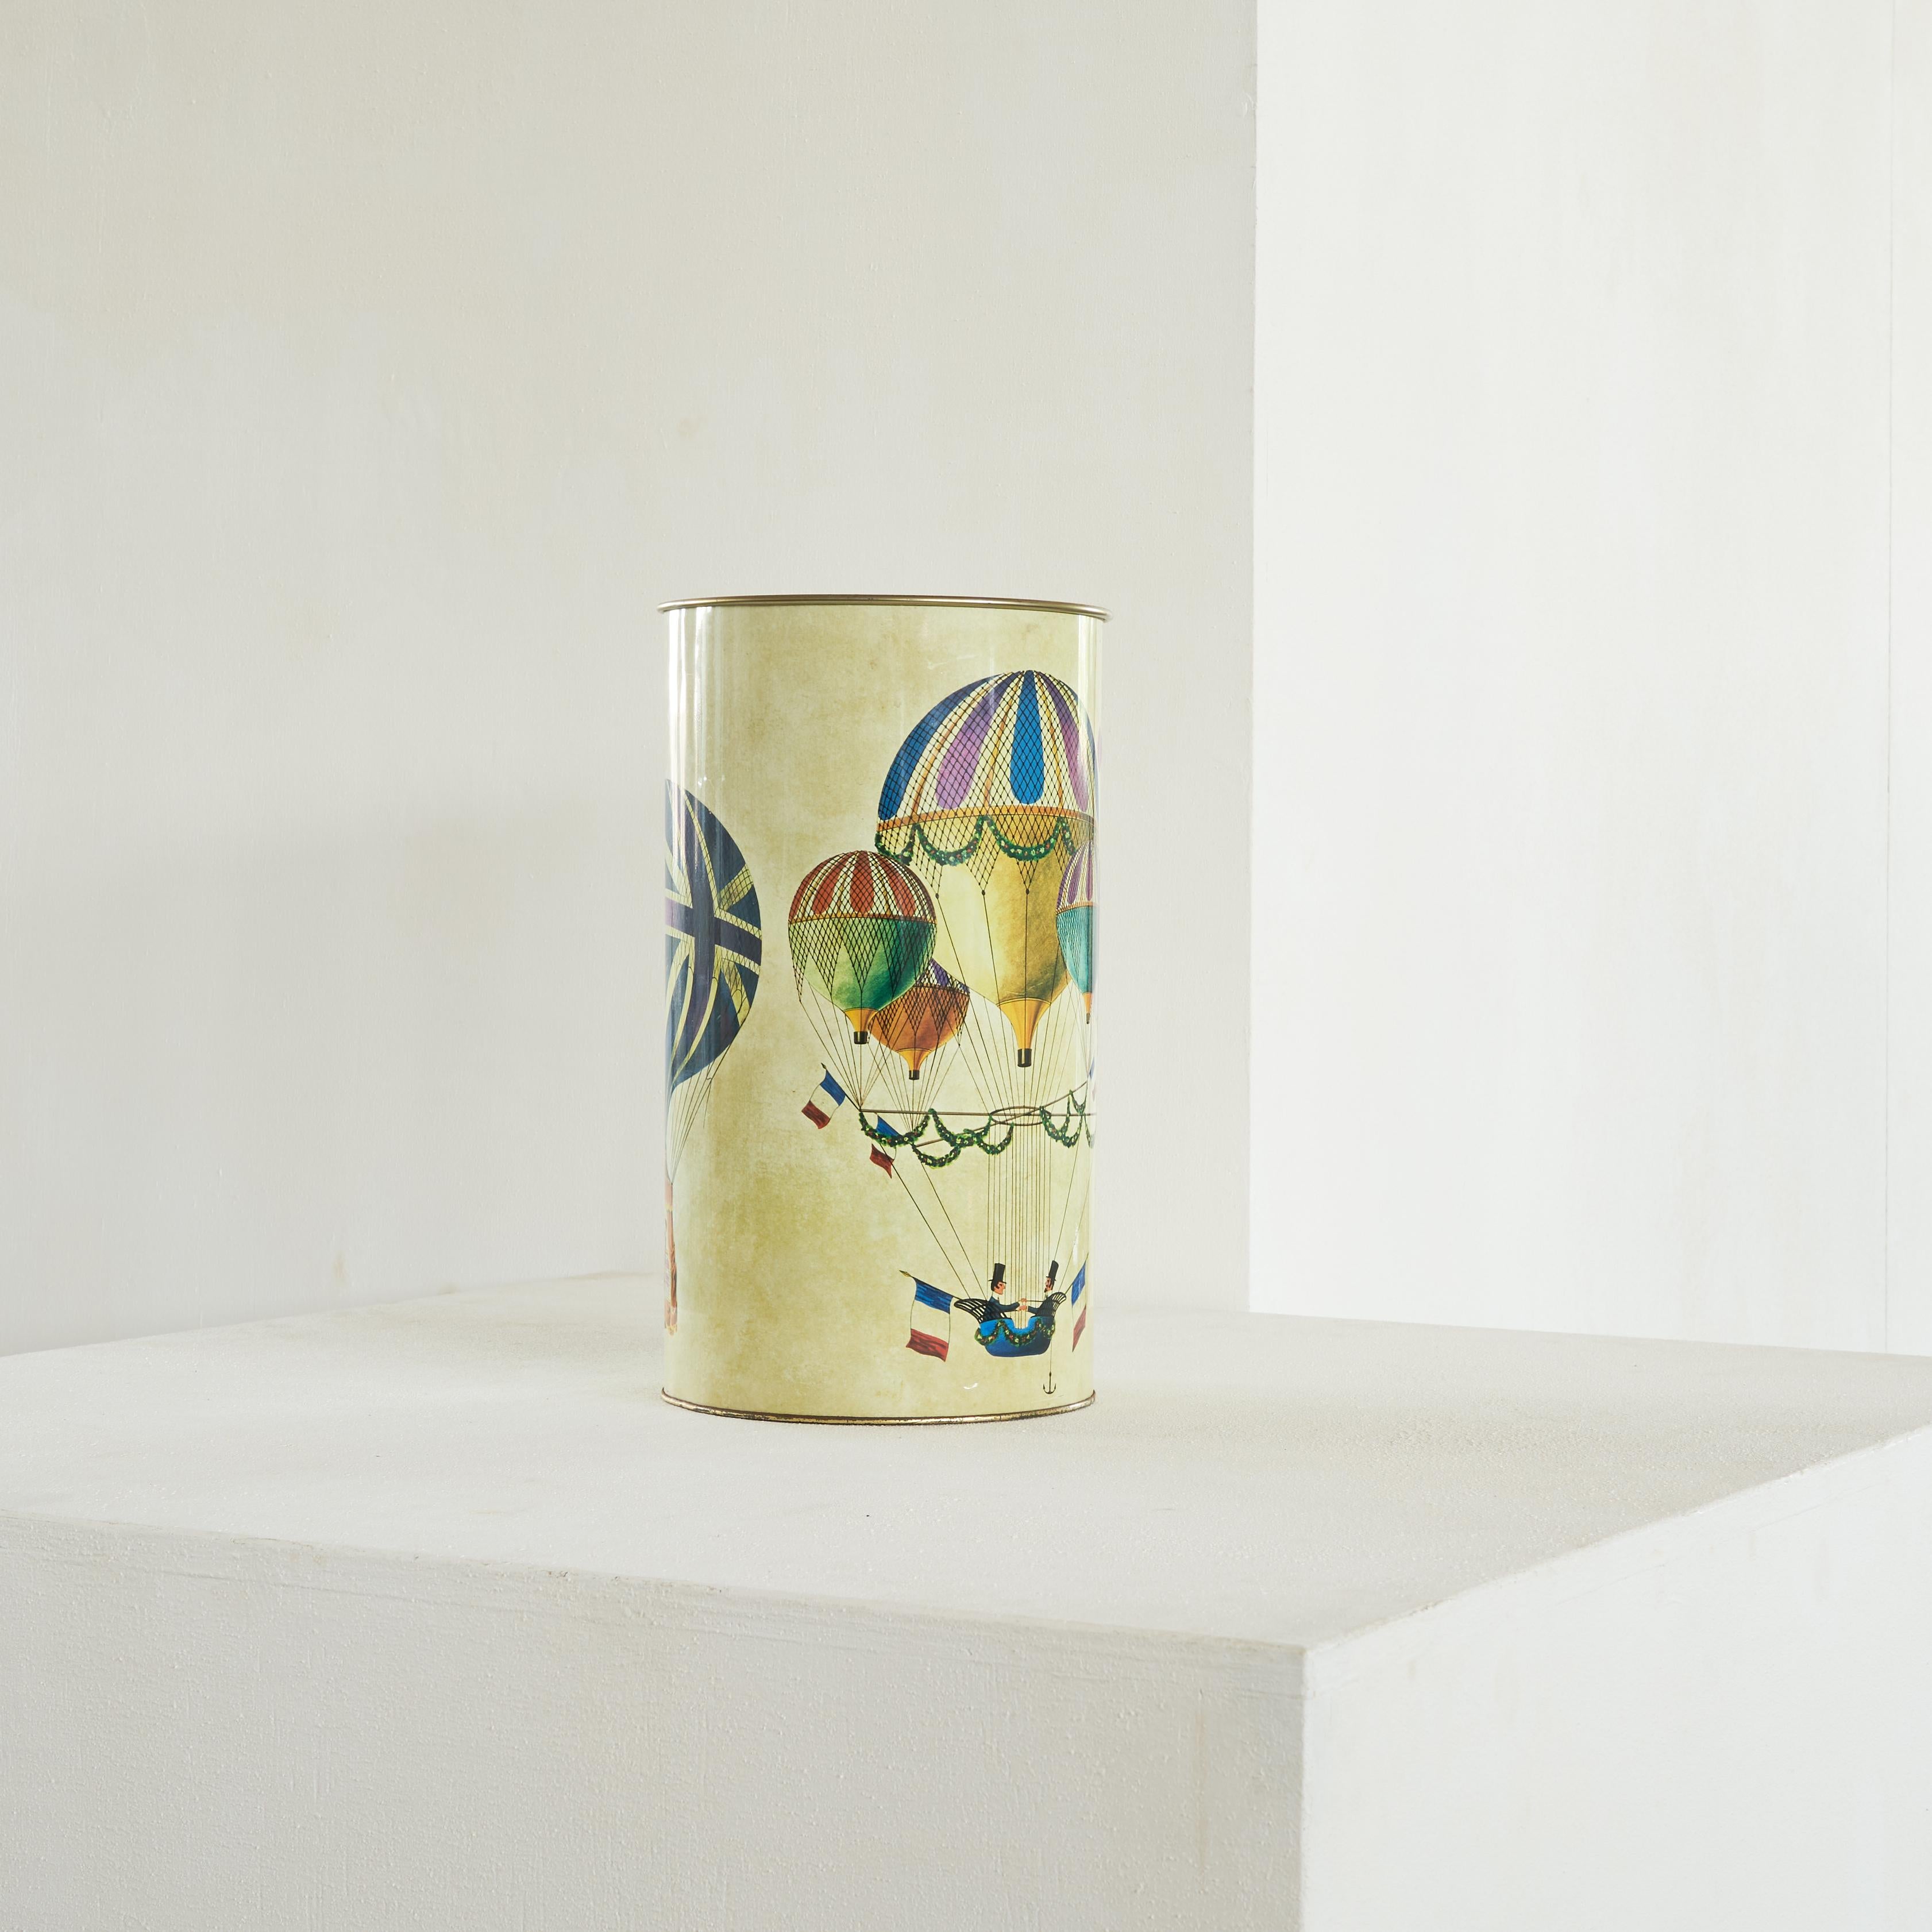 Whimsical Waste Paper Basket in the Style of Piero Fornasetti, 1960s.

This is a wonderful and large waste paper basket or decorative basket in the style of the famous Italian designer and artist Piero Fornasetti. It resembles his works with hot